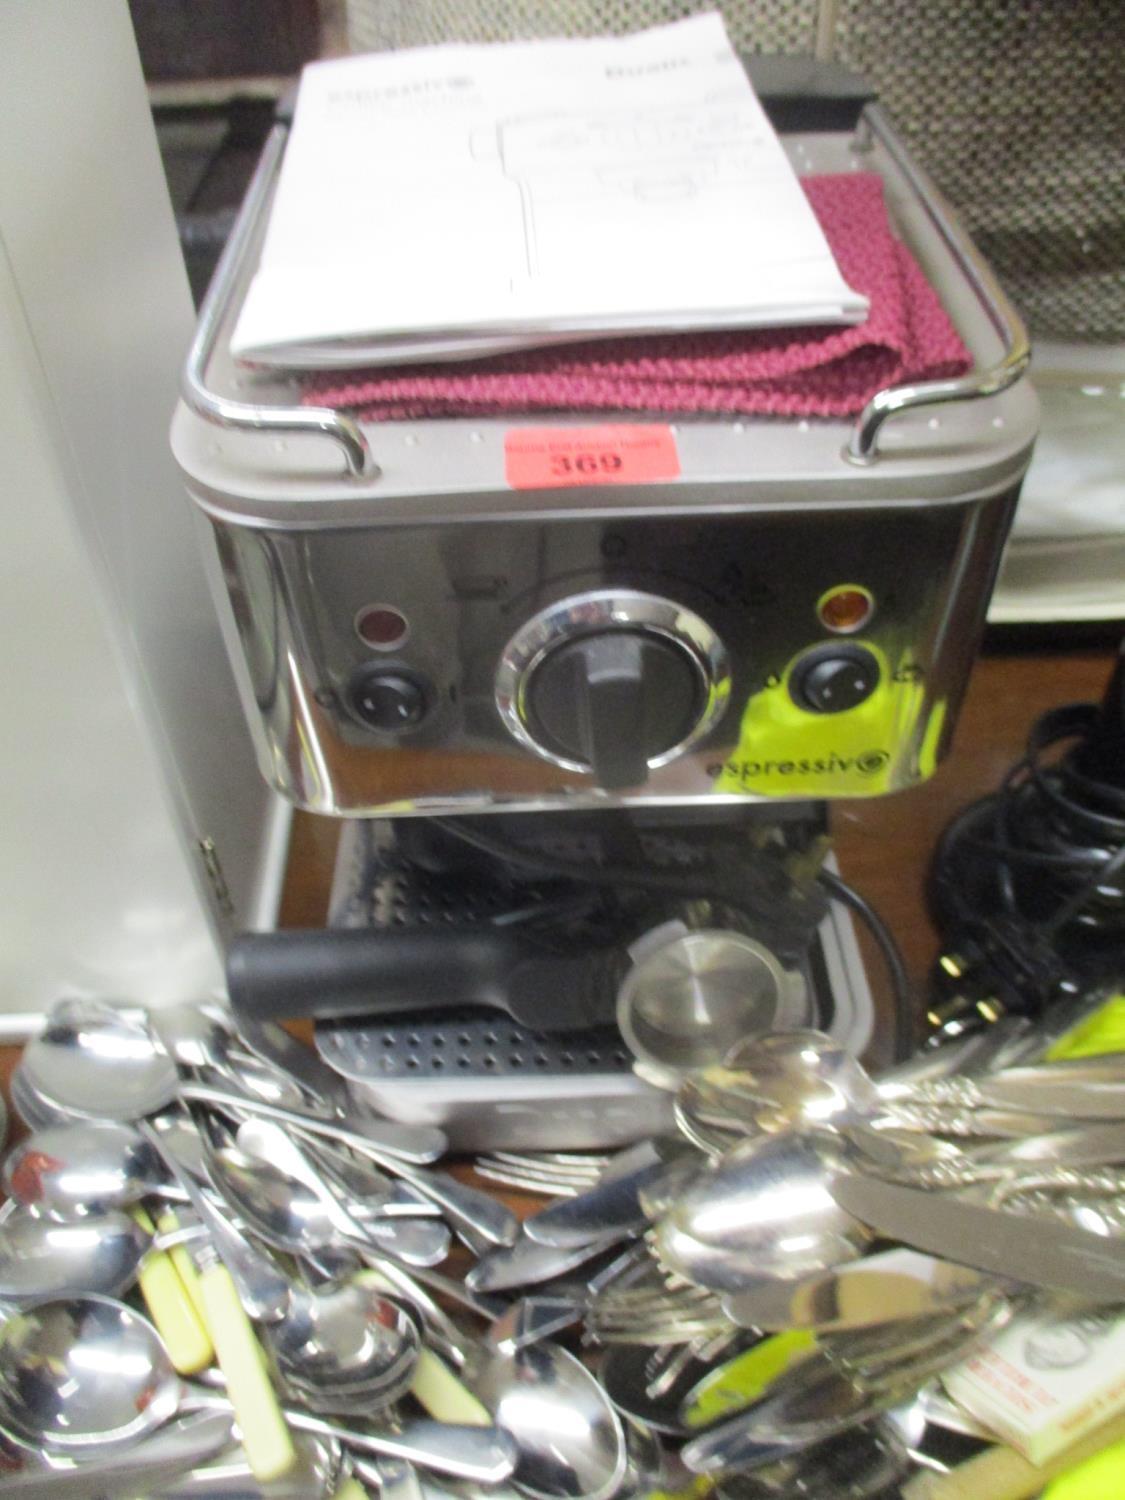 An Espresso Dualit coffee machine, selection of cutlery, a table lamp and other items - Image 2 of 2